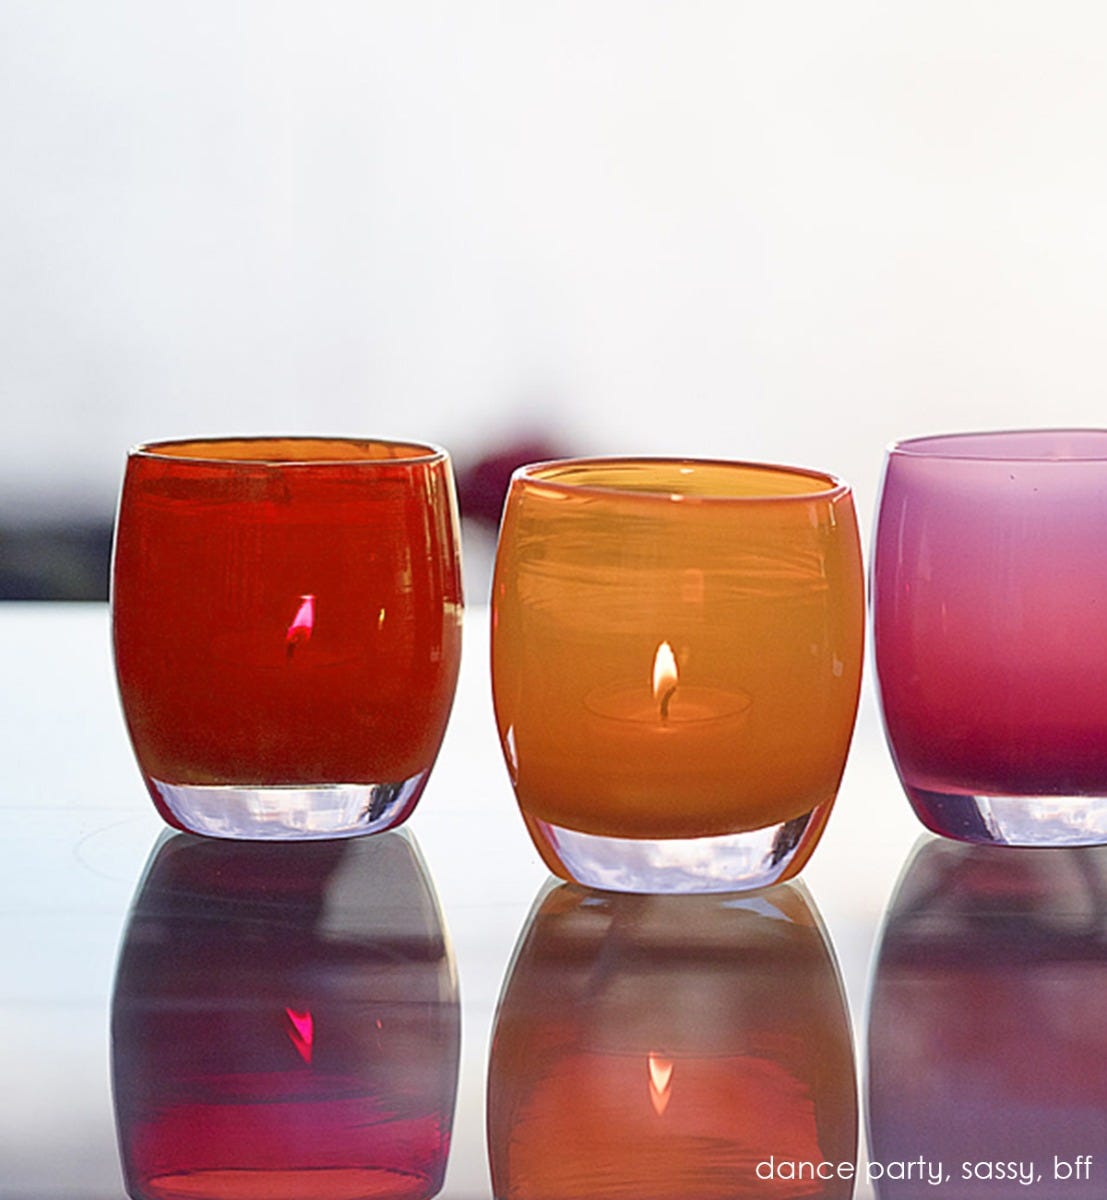 dance party ginger red, hand-blown glass votive candle holder. paired with sassy and bff